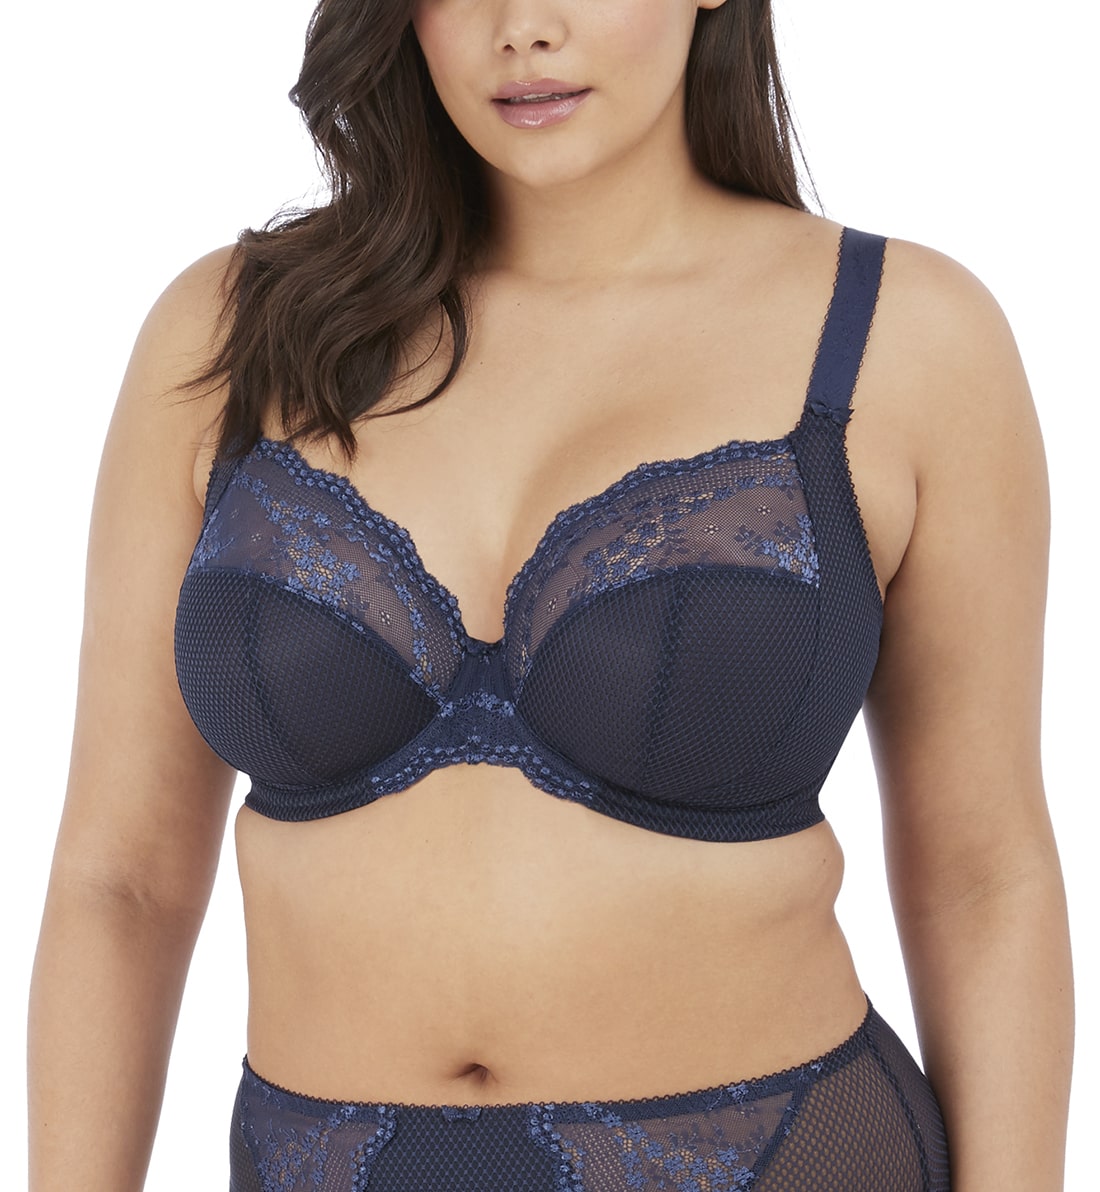 Elomi Charley Banded Stretch Lace Plunge Underwire Bra (4382),32GG,Navy - Navy,32GG